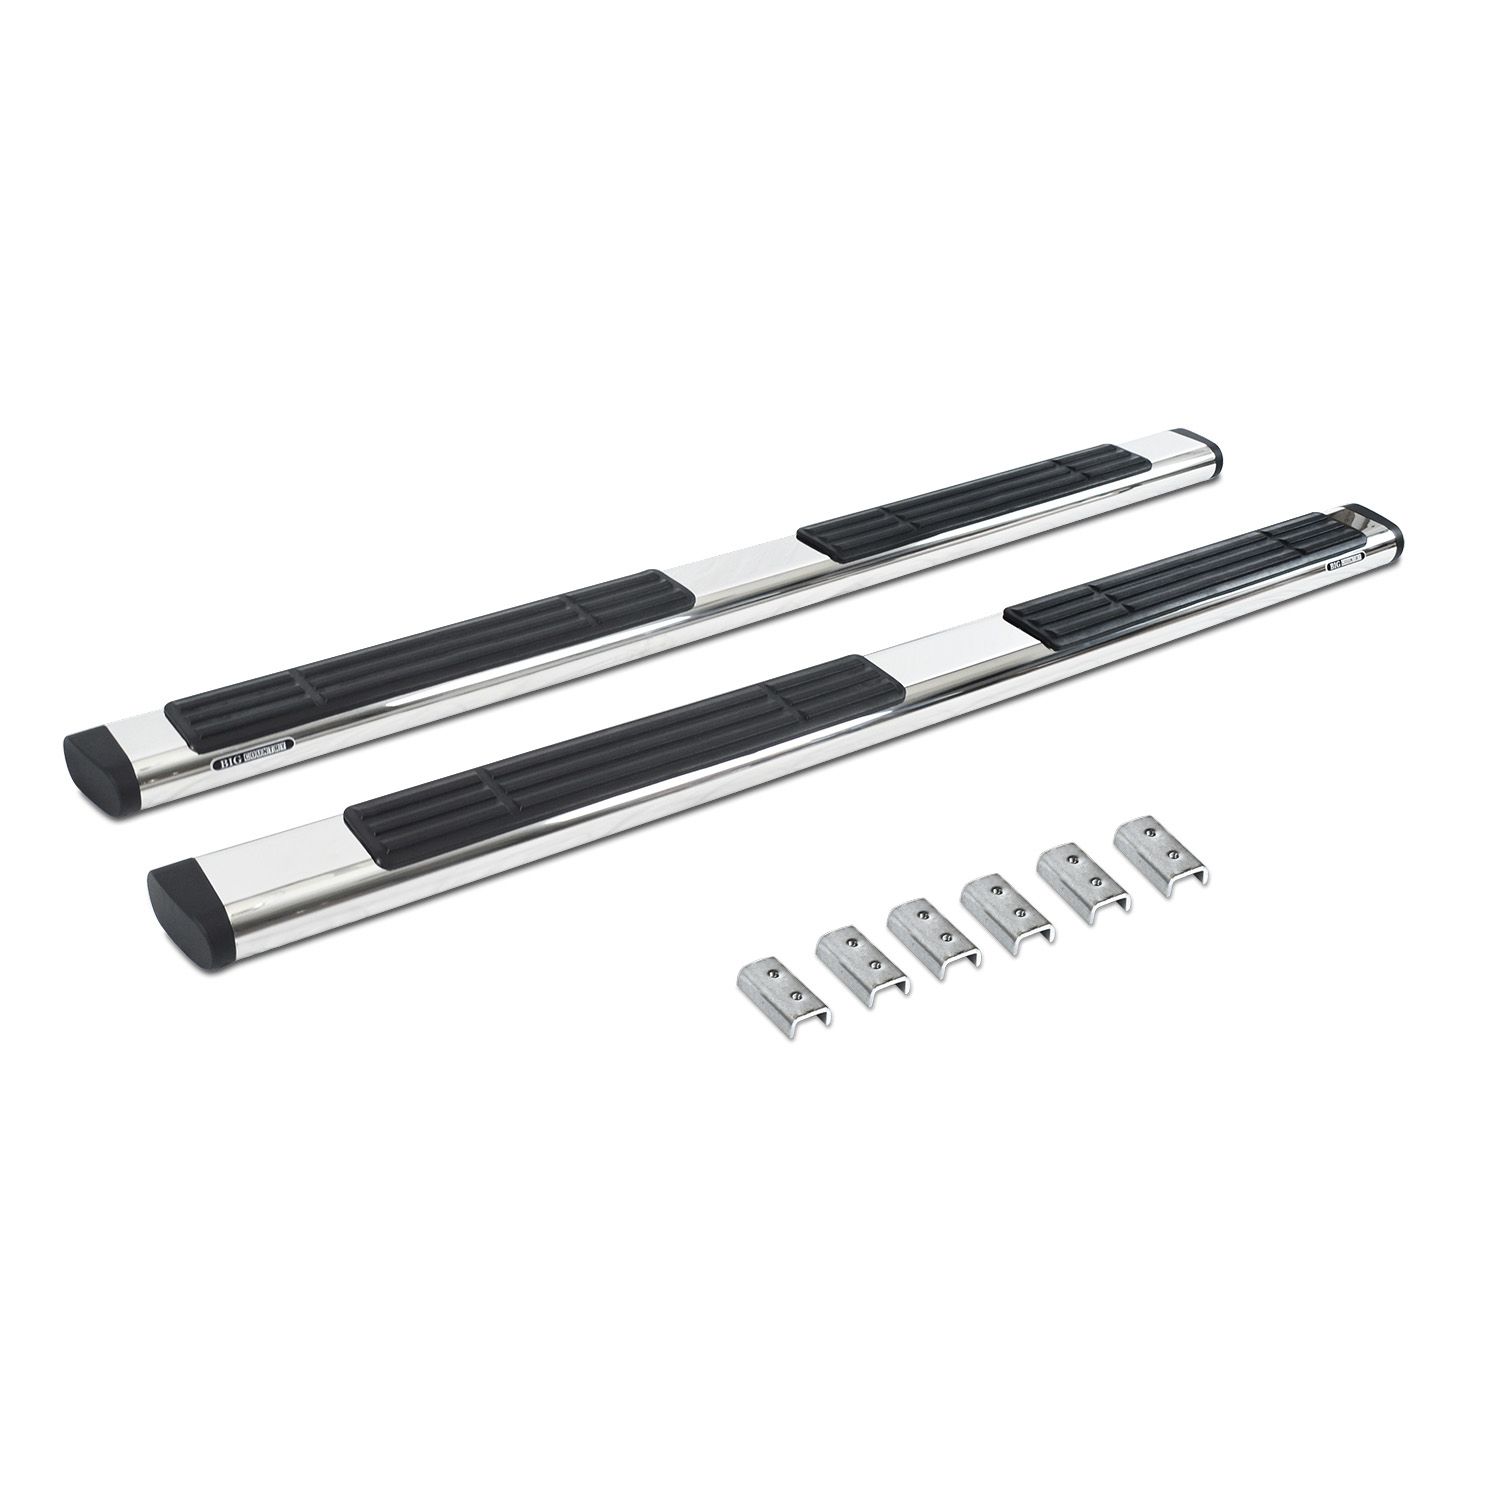 Go Rhino 660087PS - 6" OE Xtreme Series SideSteps - Boards Only - Polished Stainless Steel